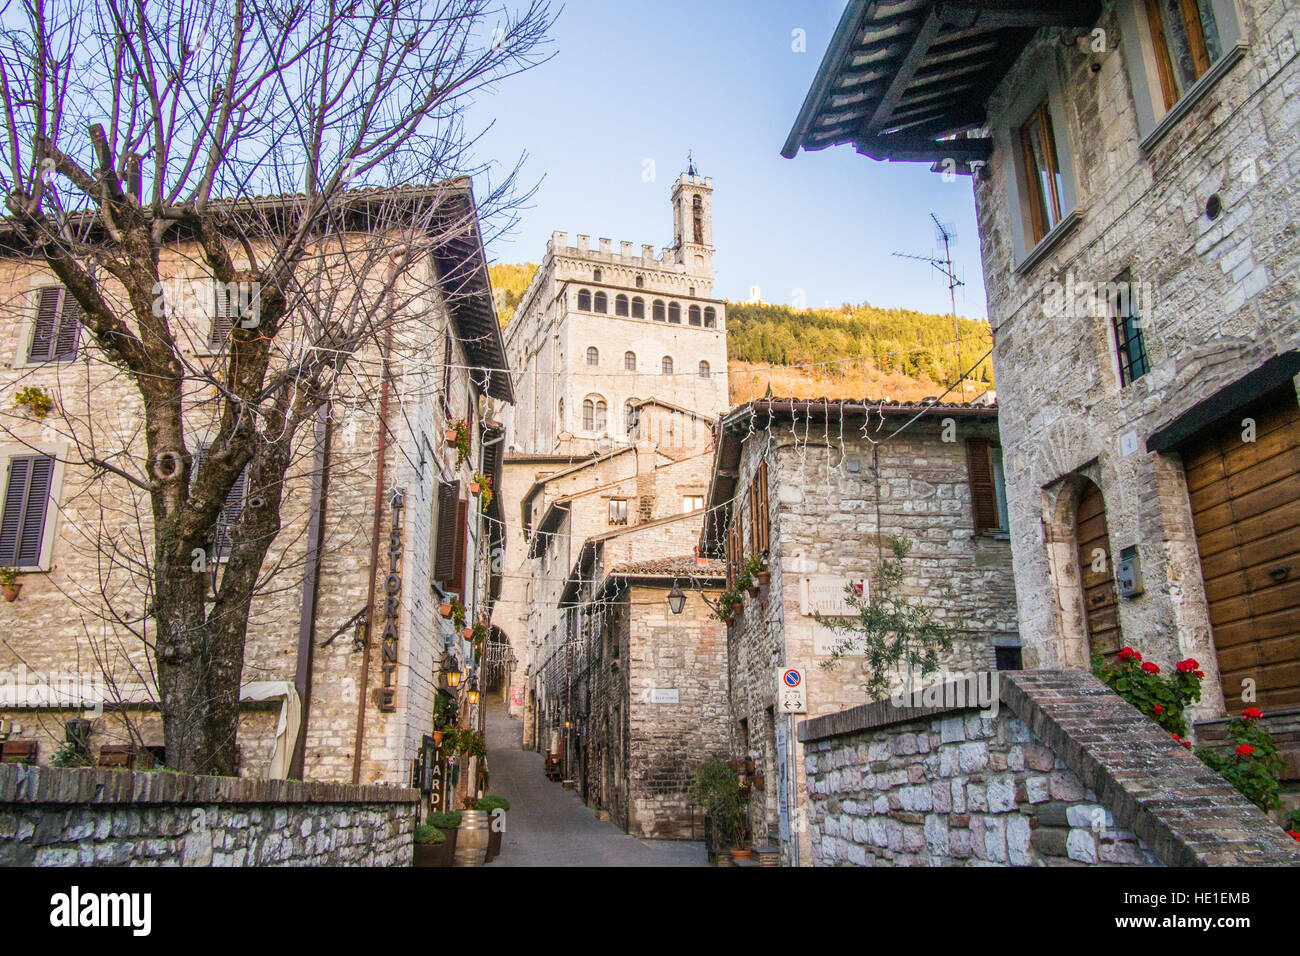 Medieval town of Gubbio in the Perugia province, Umbria region, Italy. Stock Photo